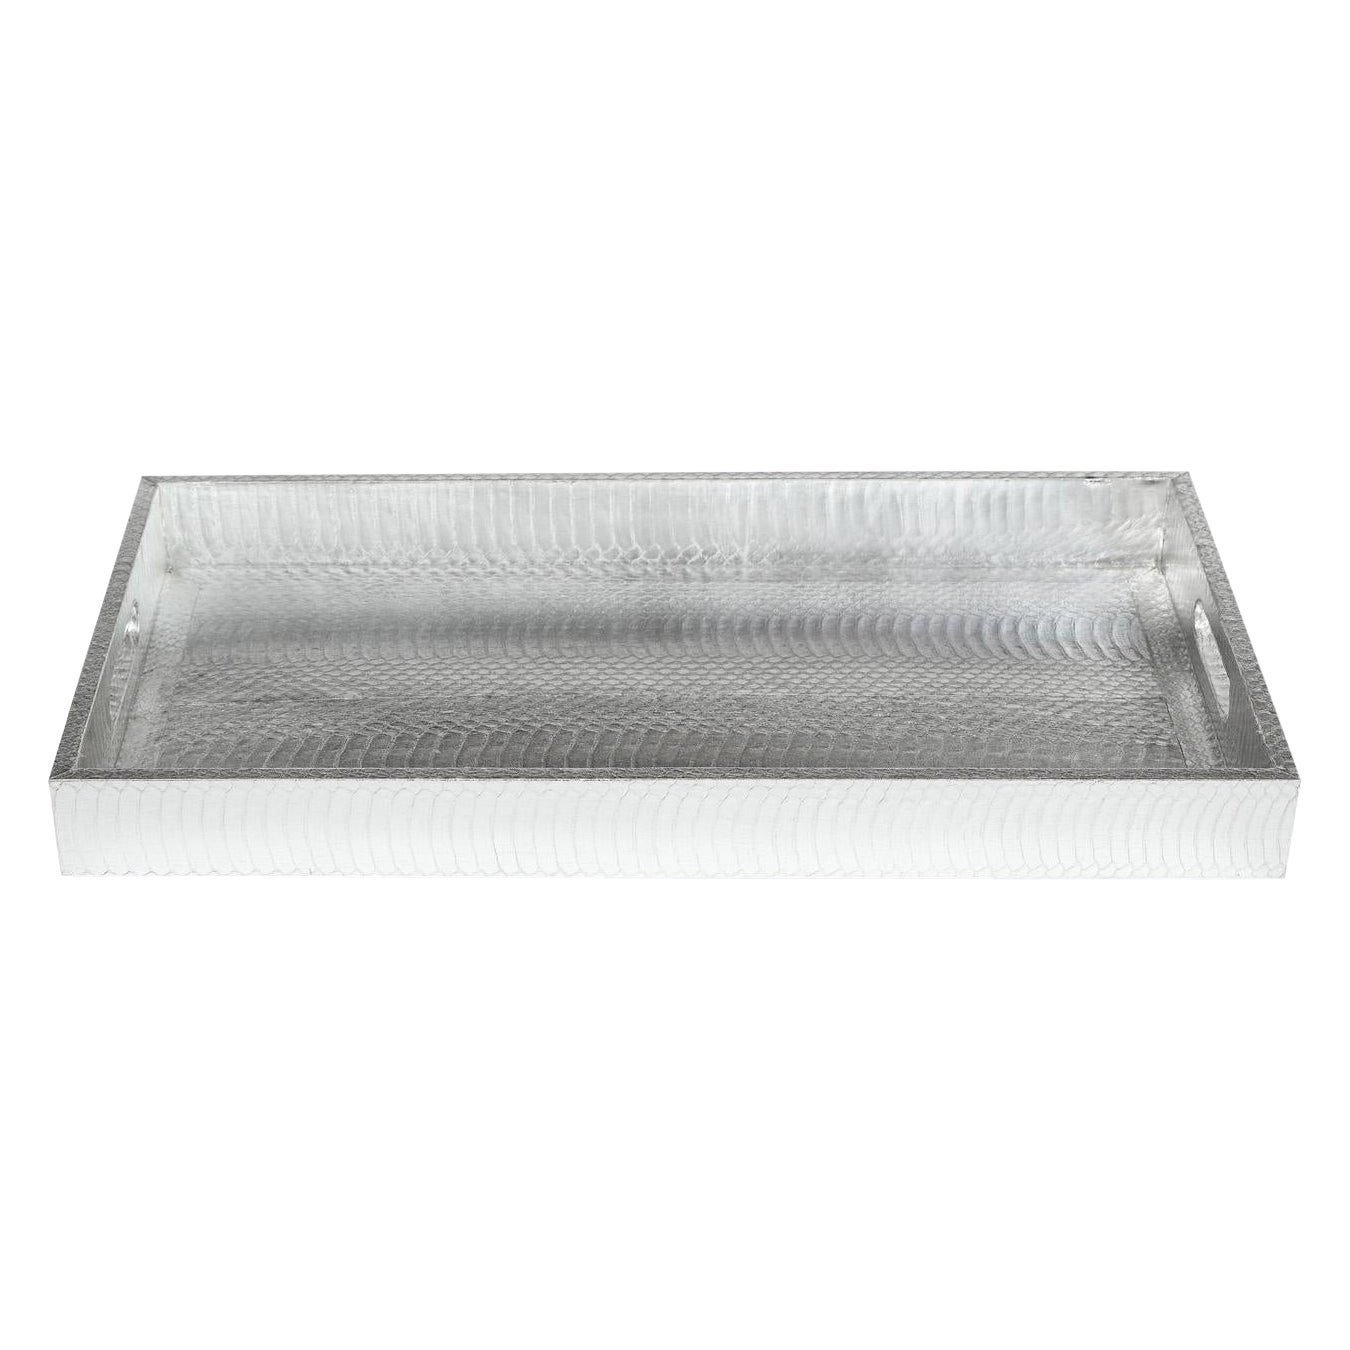 Lobel Originals Tray in Silver Python, New For Sale